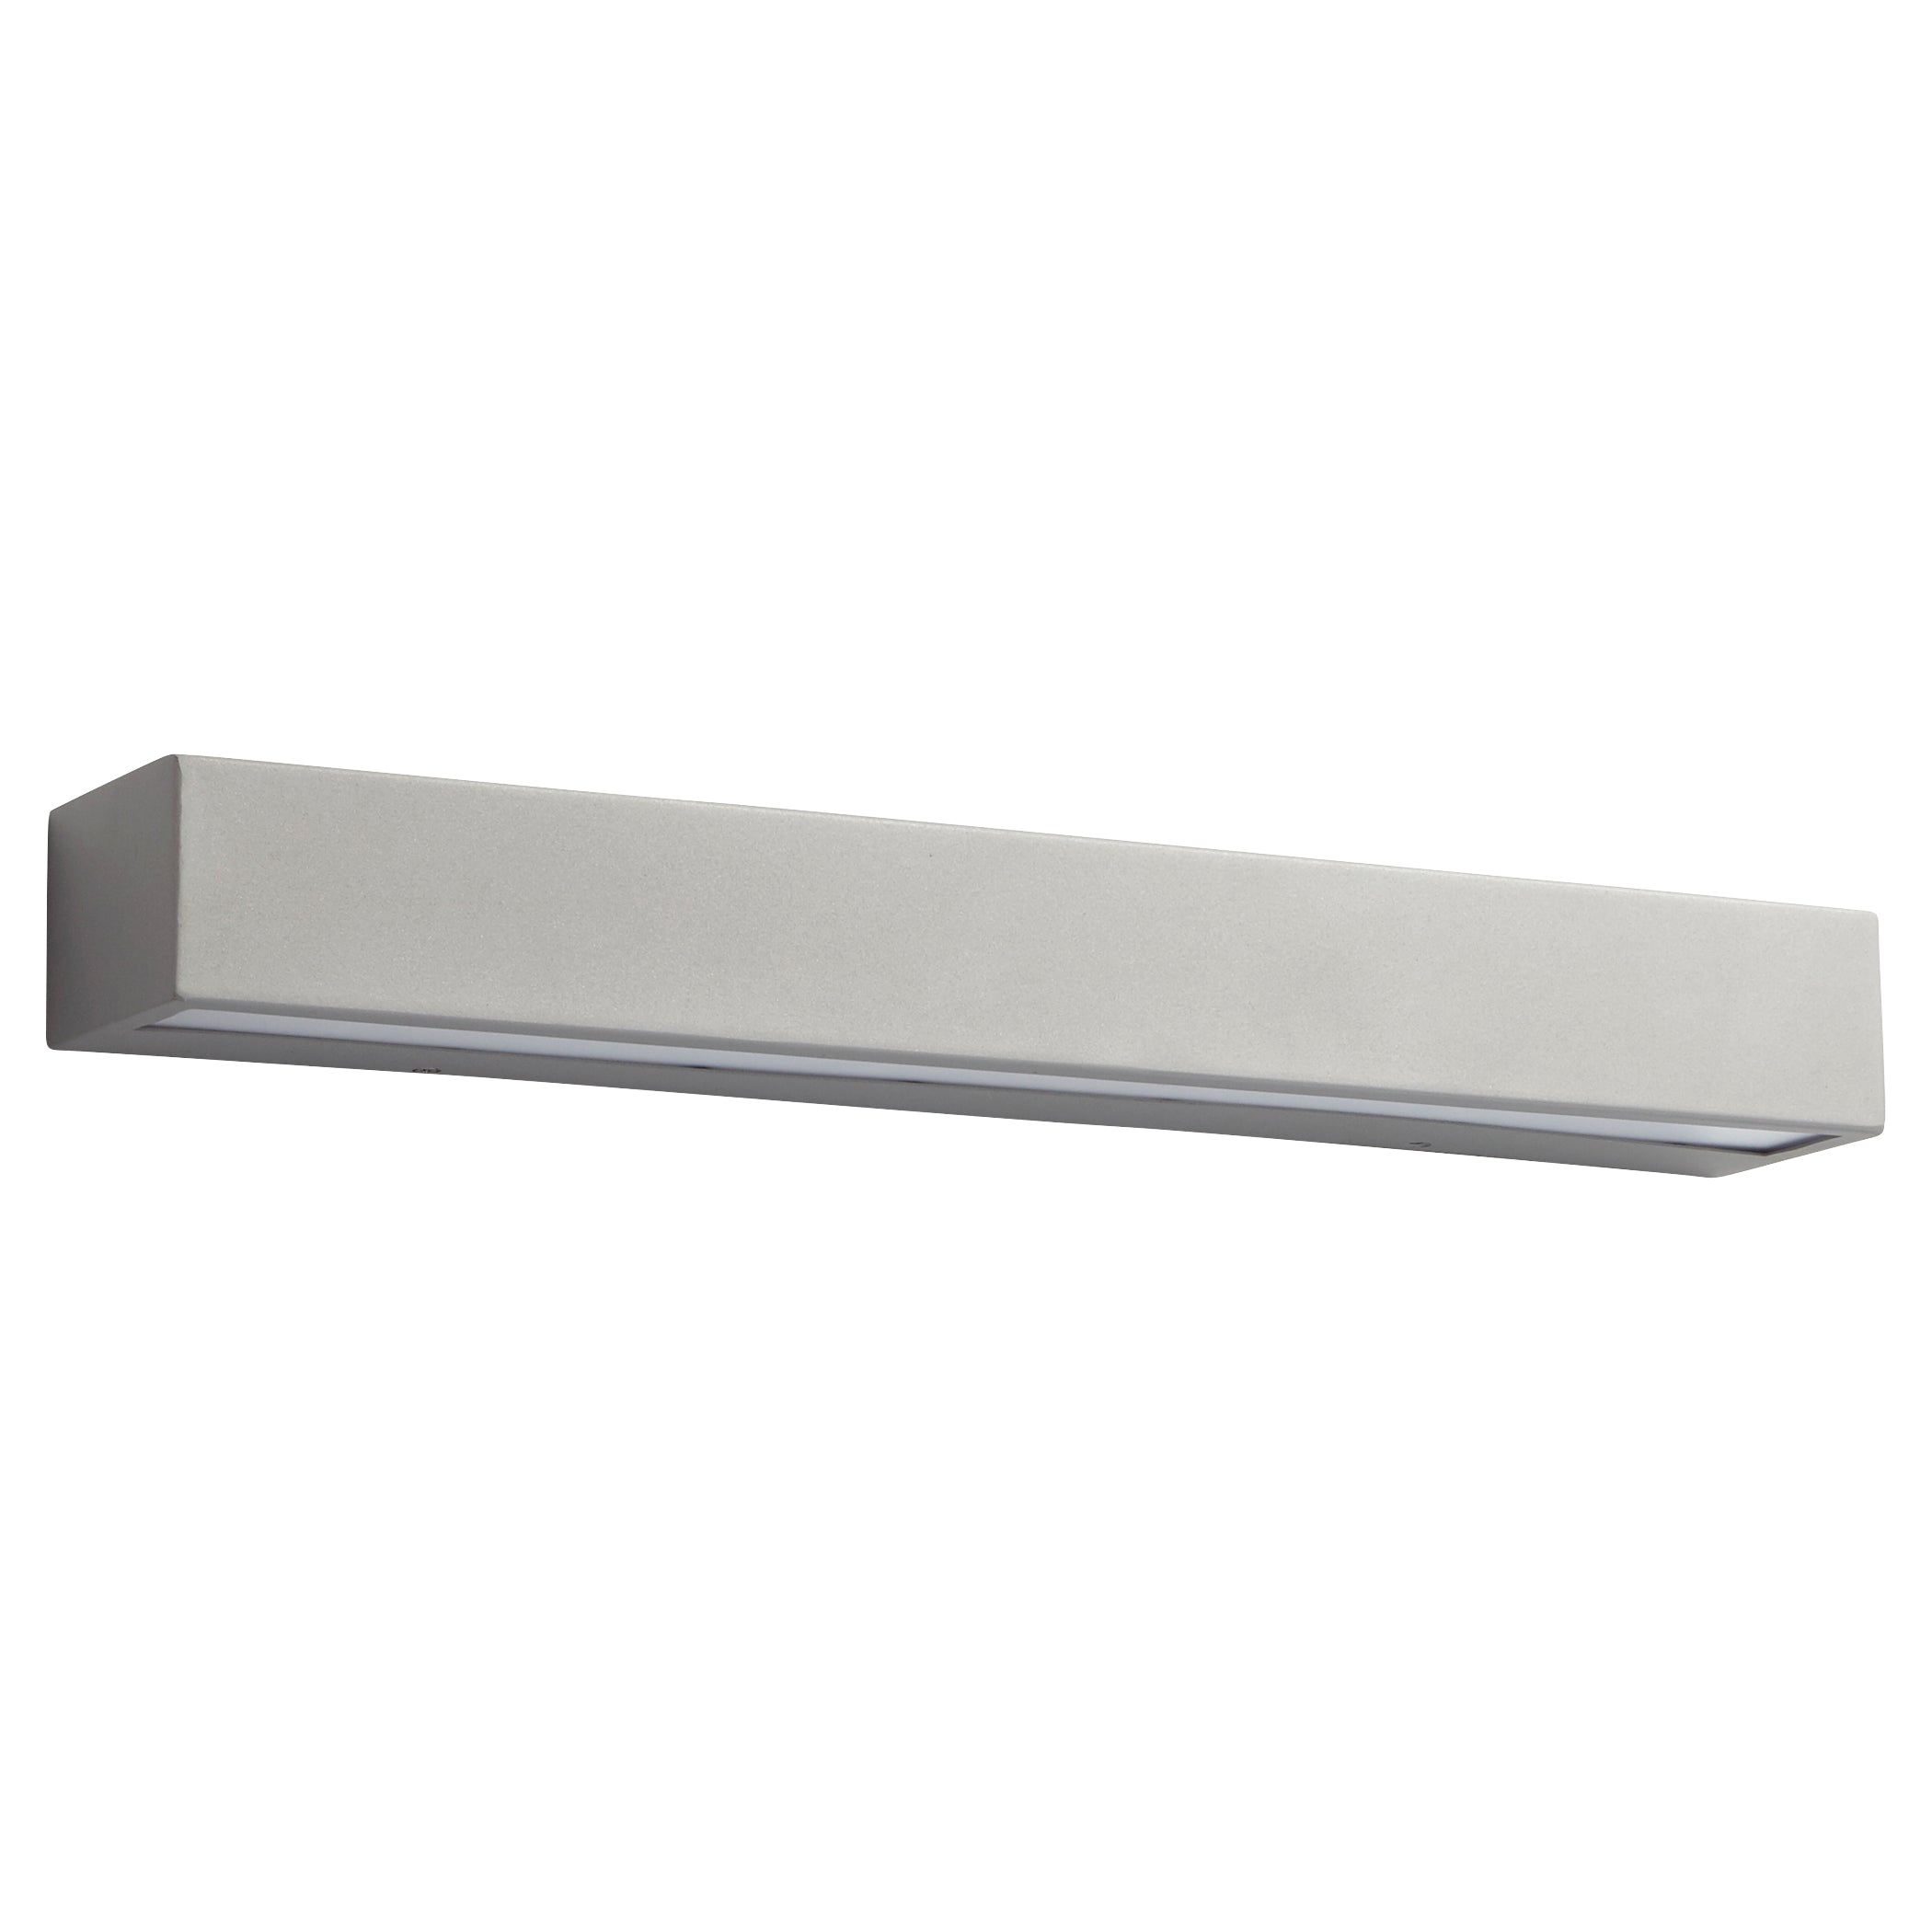 Oxygen MAIA 3-742-16 LED Wall Sconce Light Fixture, 24 Inch - Grey